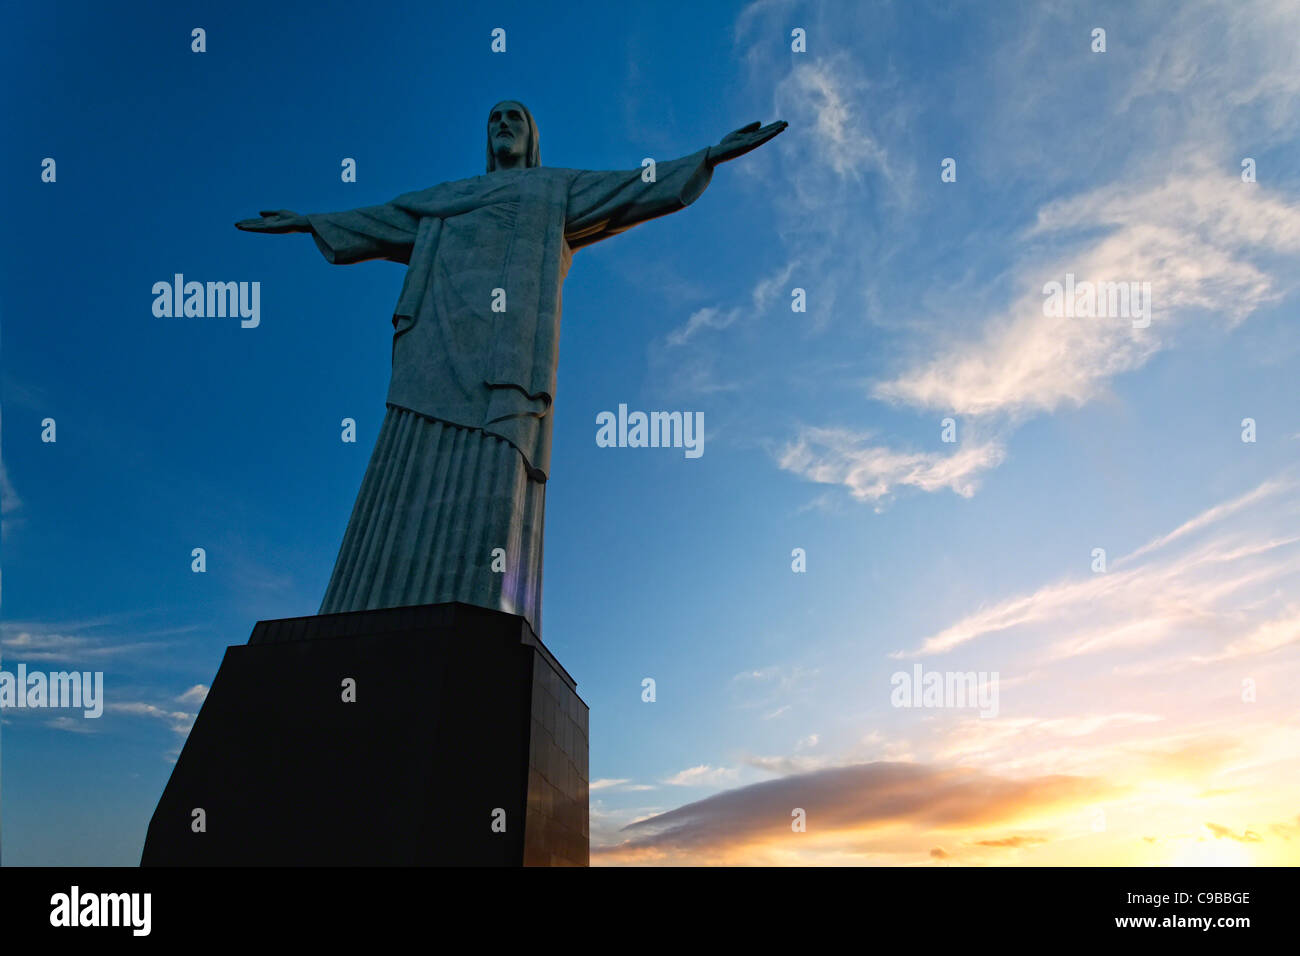 Low Angle View of the Christ the Redeemer Statue at Sunset, Corcovado, Rio de Janeiro, Brazil Stock Photo